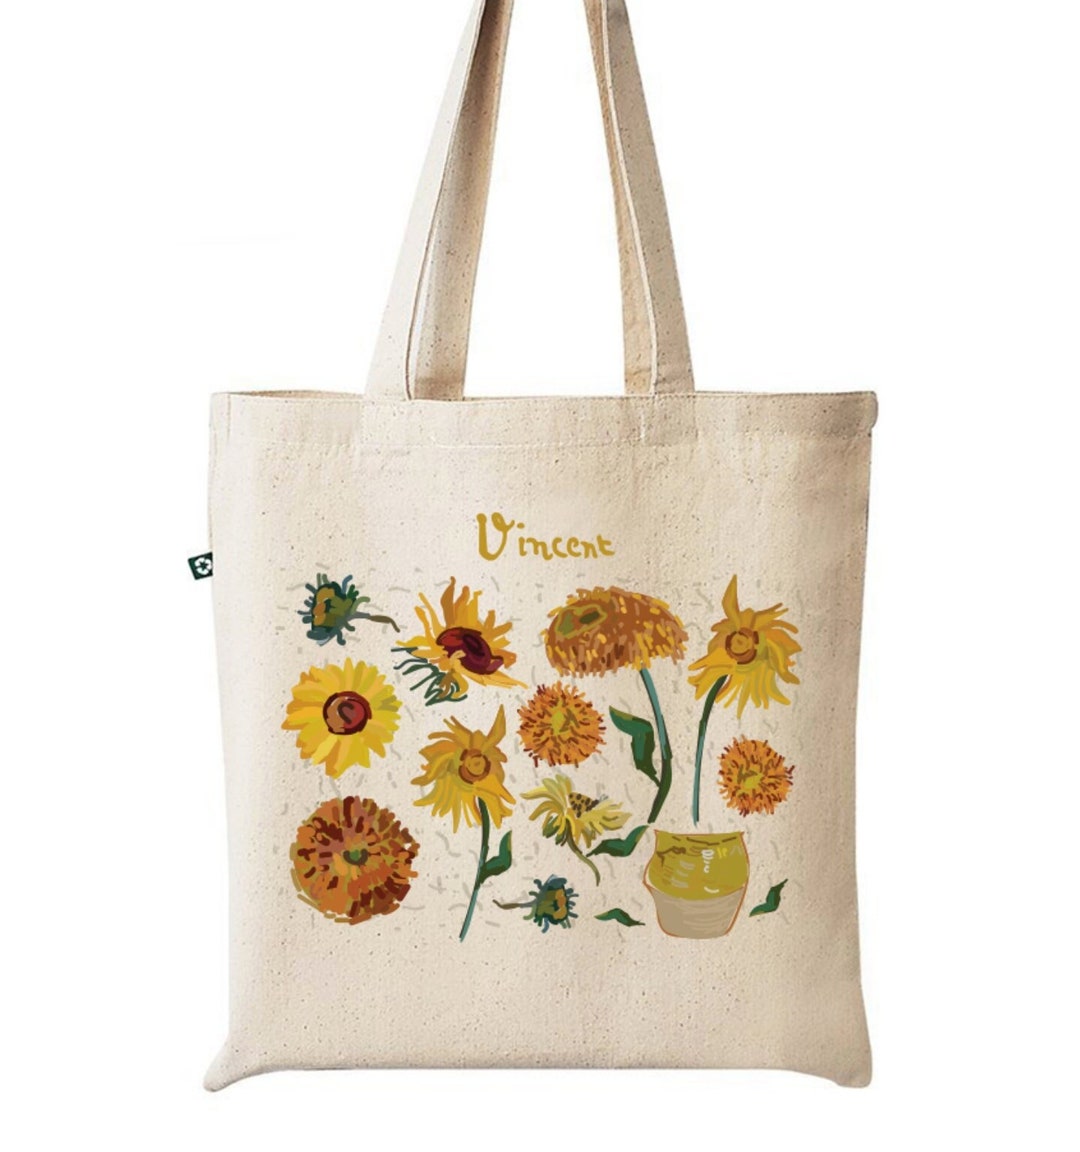 VINCENT'S SUNFLOWERS Tote Bag Sunflowers Tote Bag - Etsy